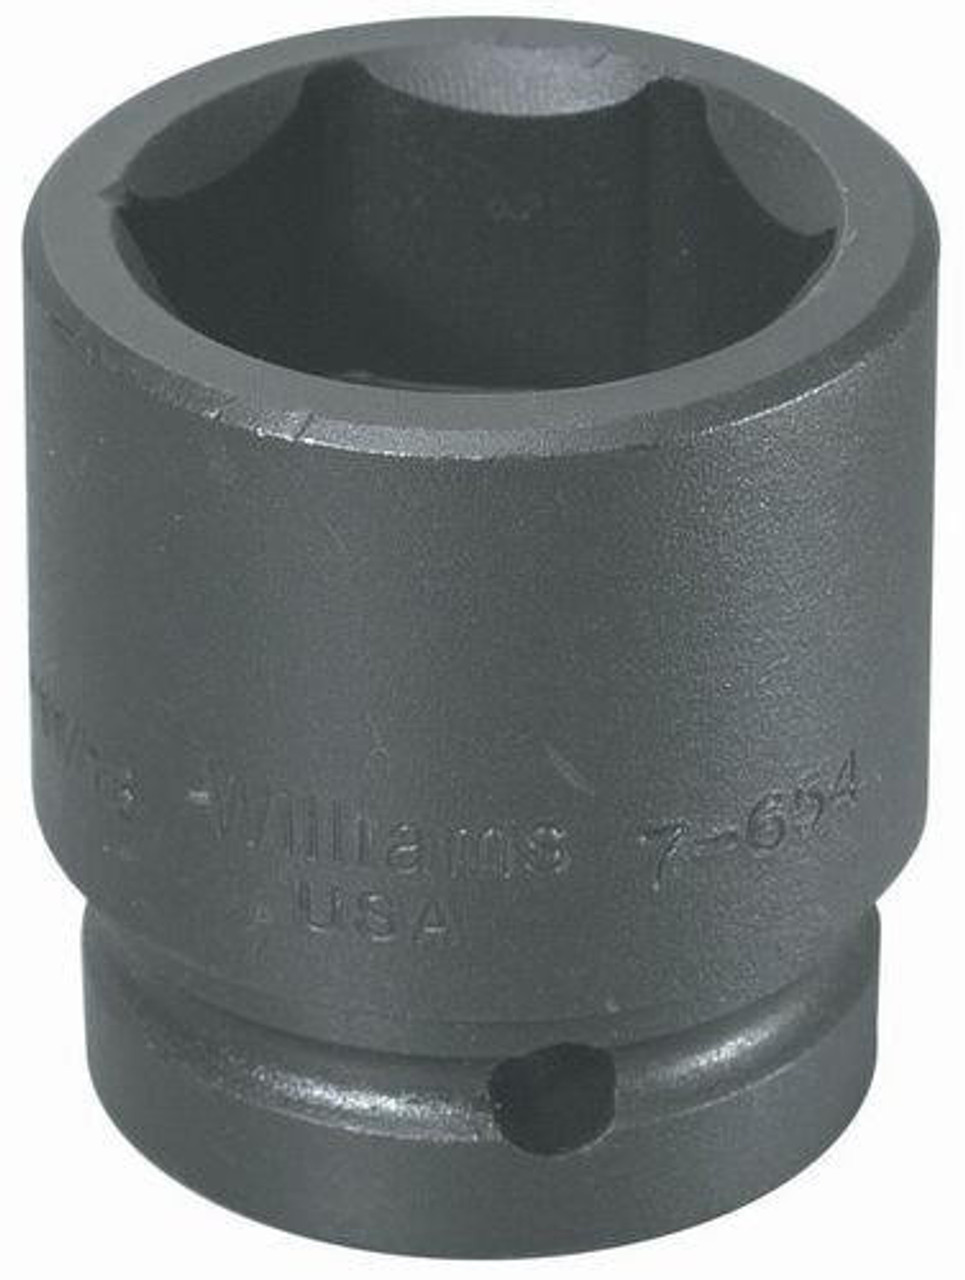 Williams Made In USA 2" Williams 1" Dr Shallow Impact Socket 6 Pt - 7-664 